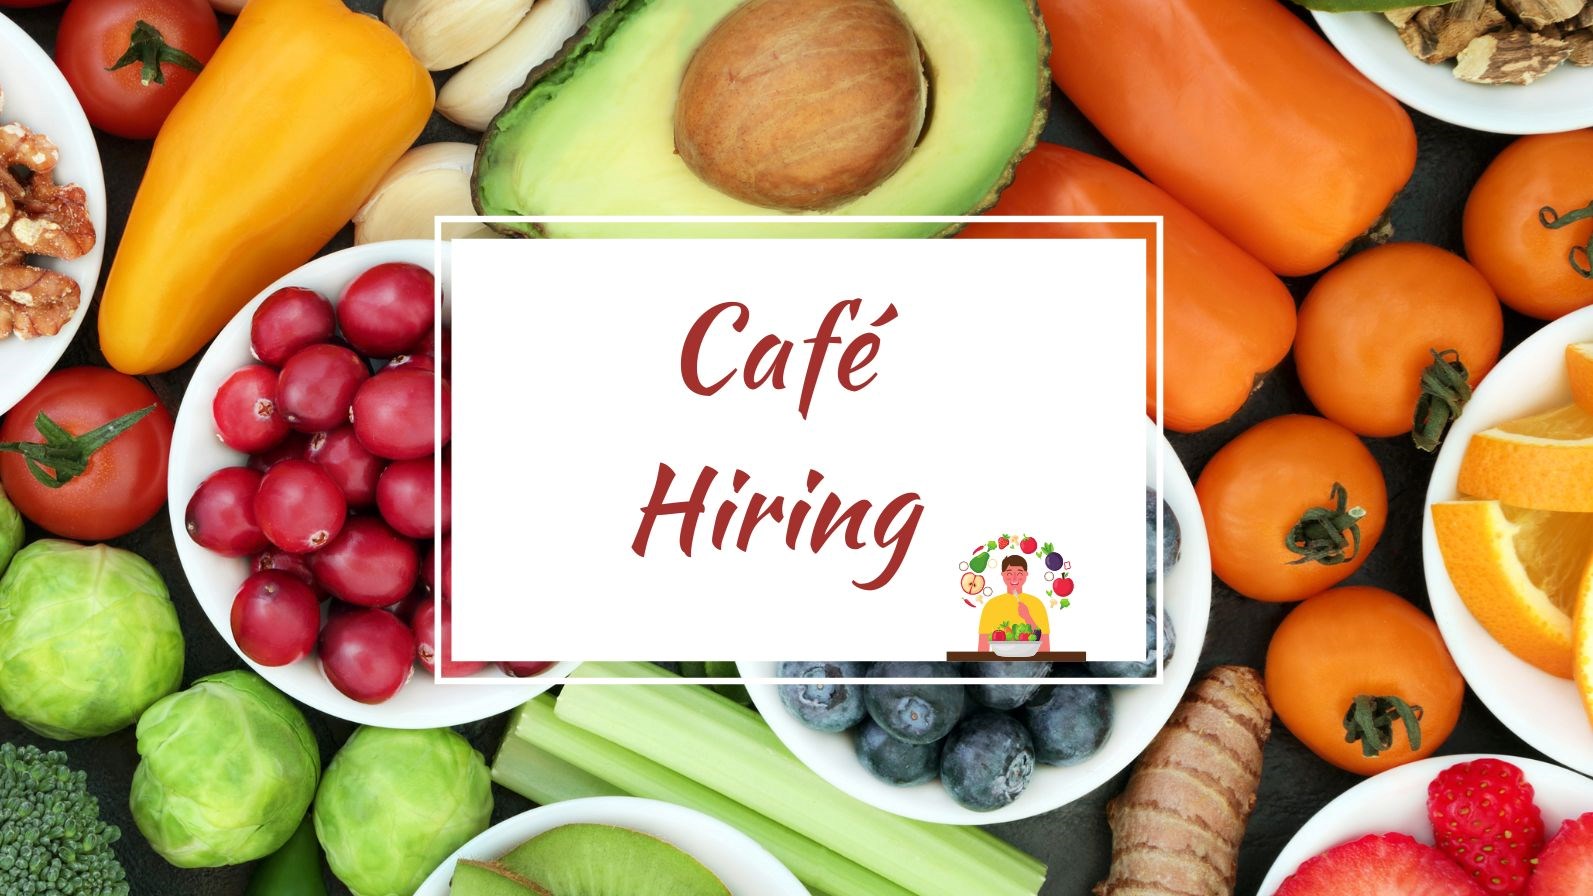 Cafe Hiring in red letters with a background of fruits and vegetables